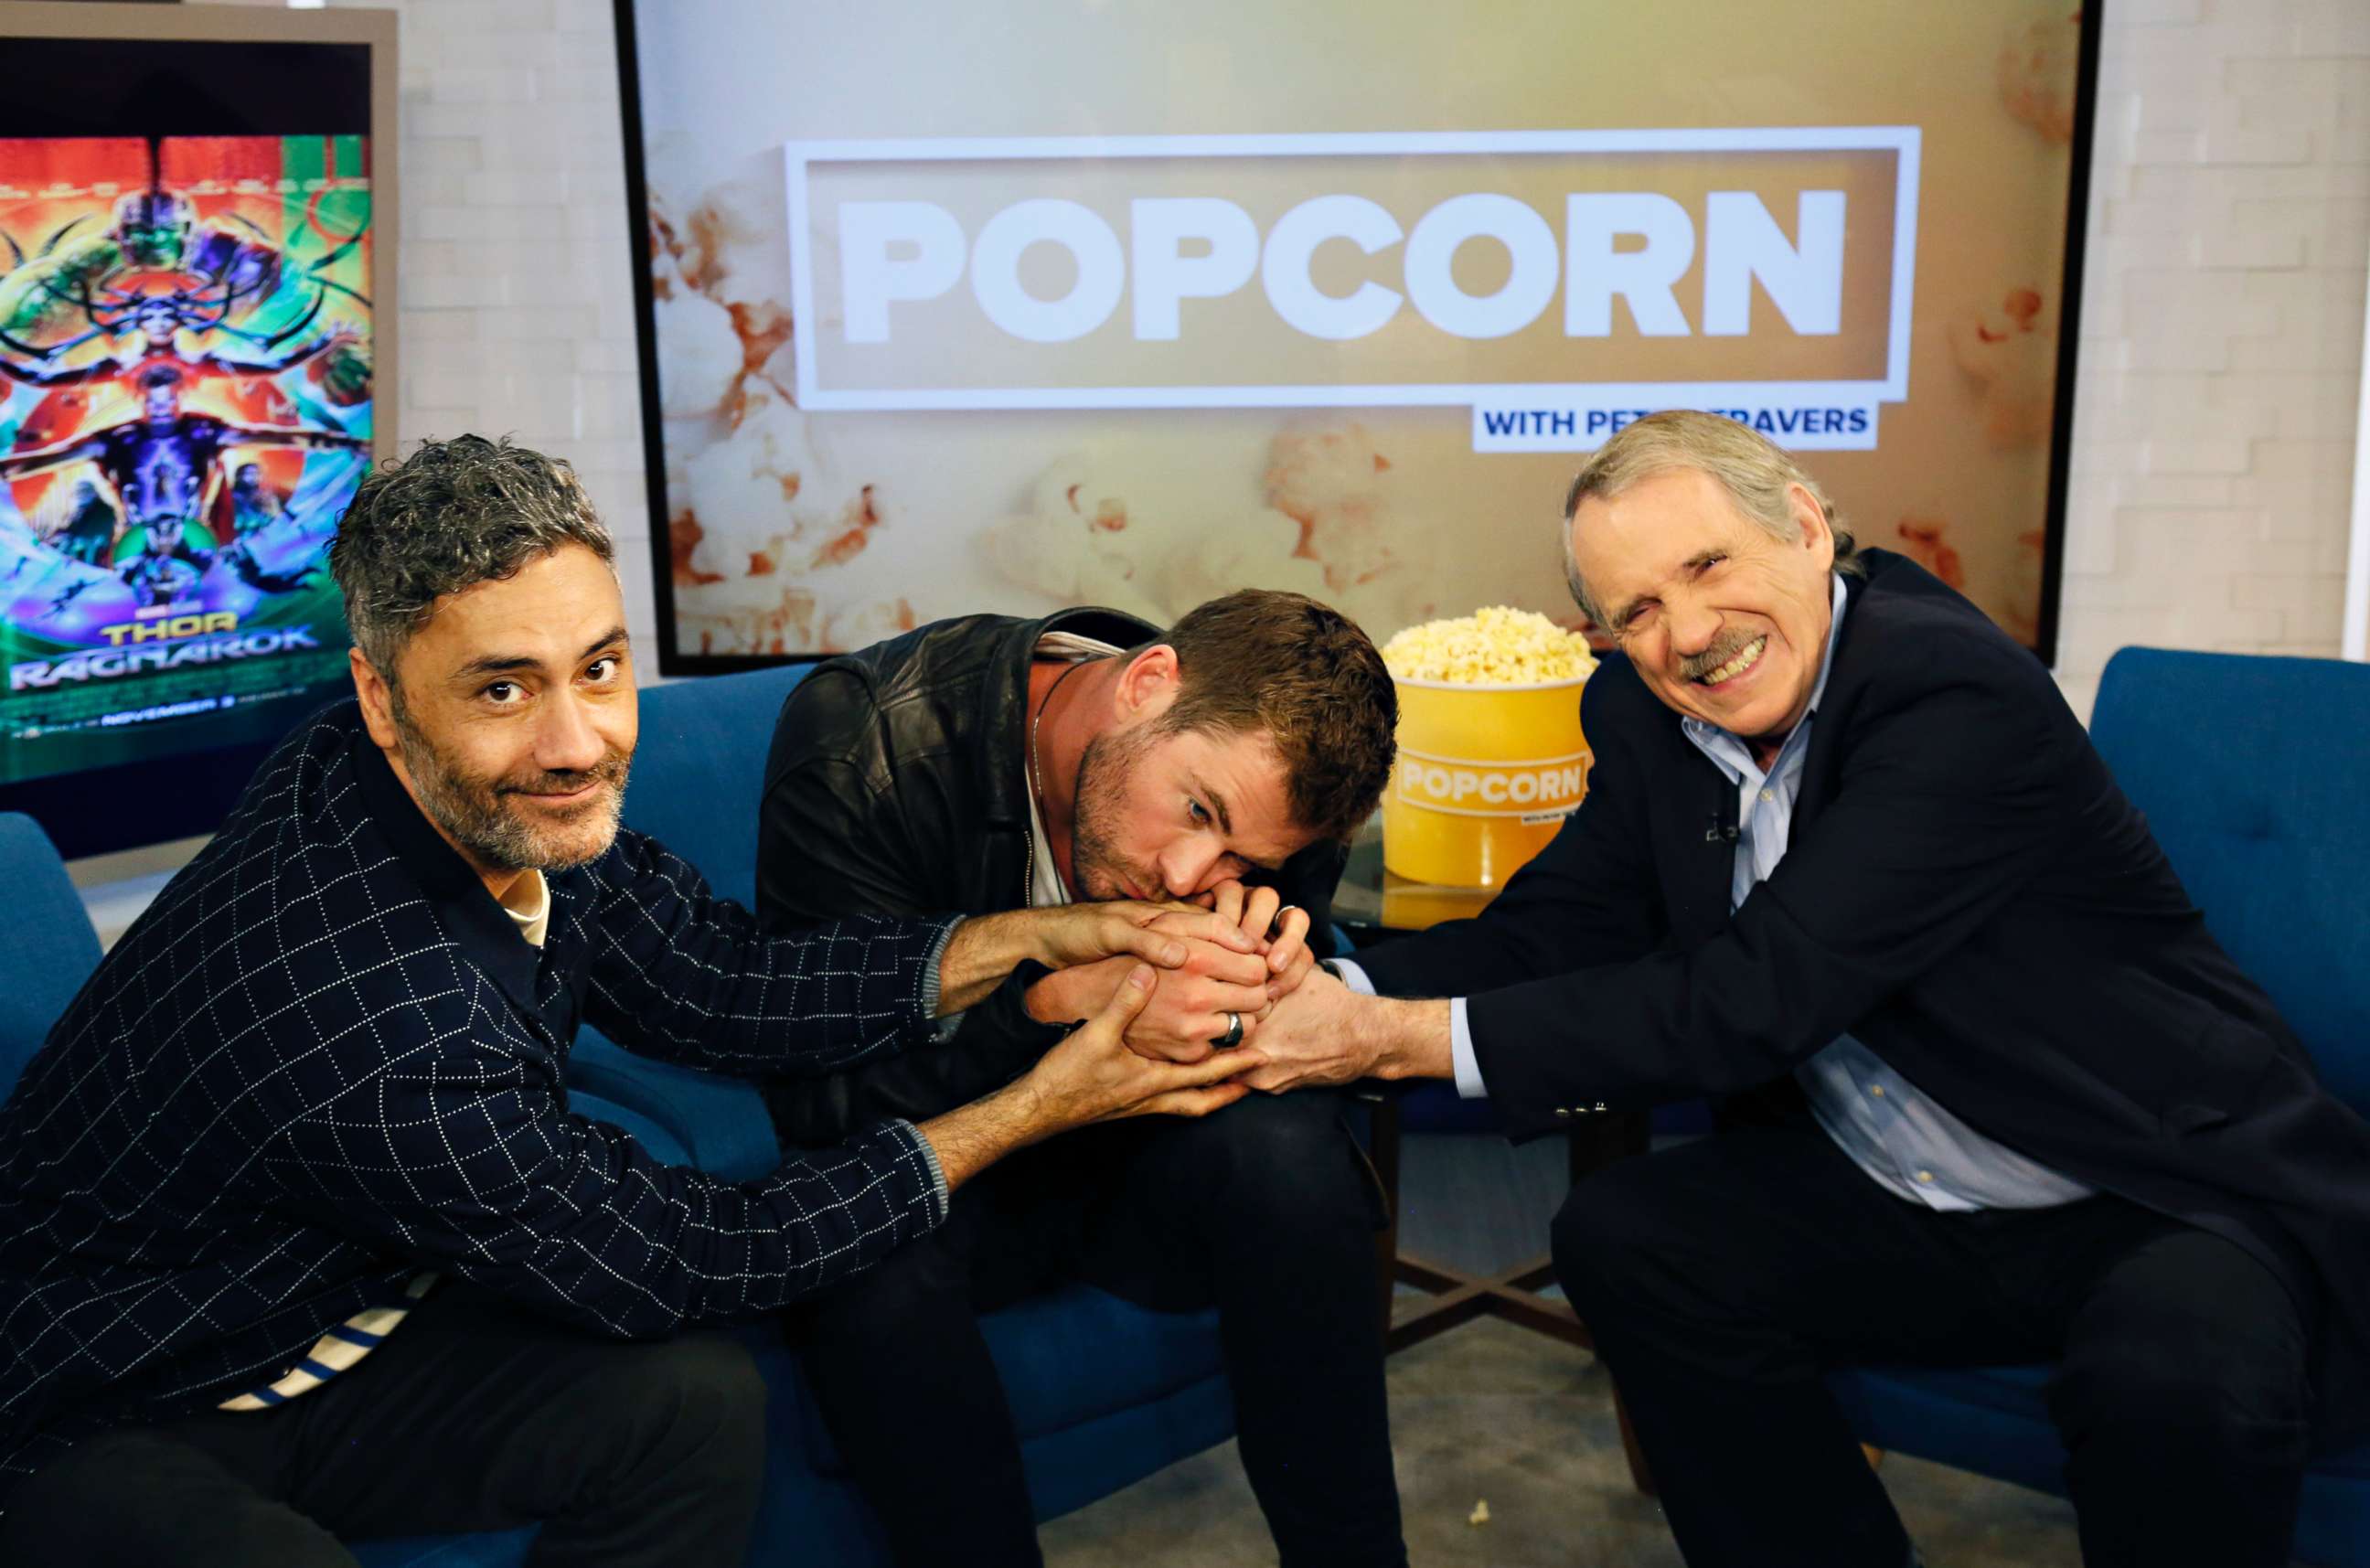 PHOTO: Director Taika Waititi and actor Chris Hemsworth appear on "Popcorn with Peter Travers" at ABC News studios, Oct. 30, 2017, in New York City.